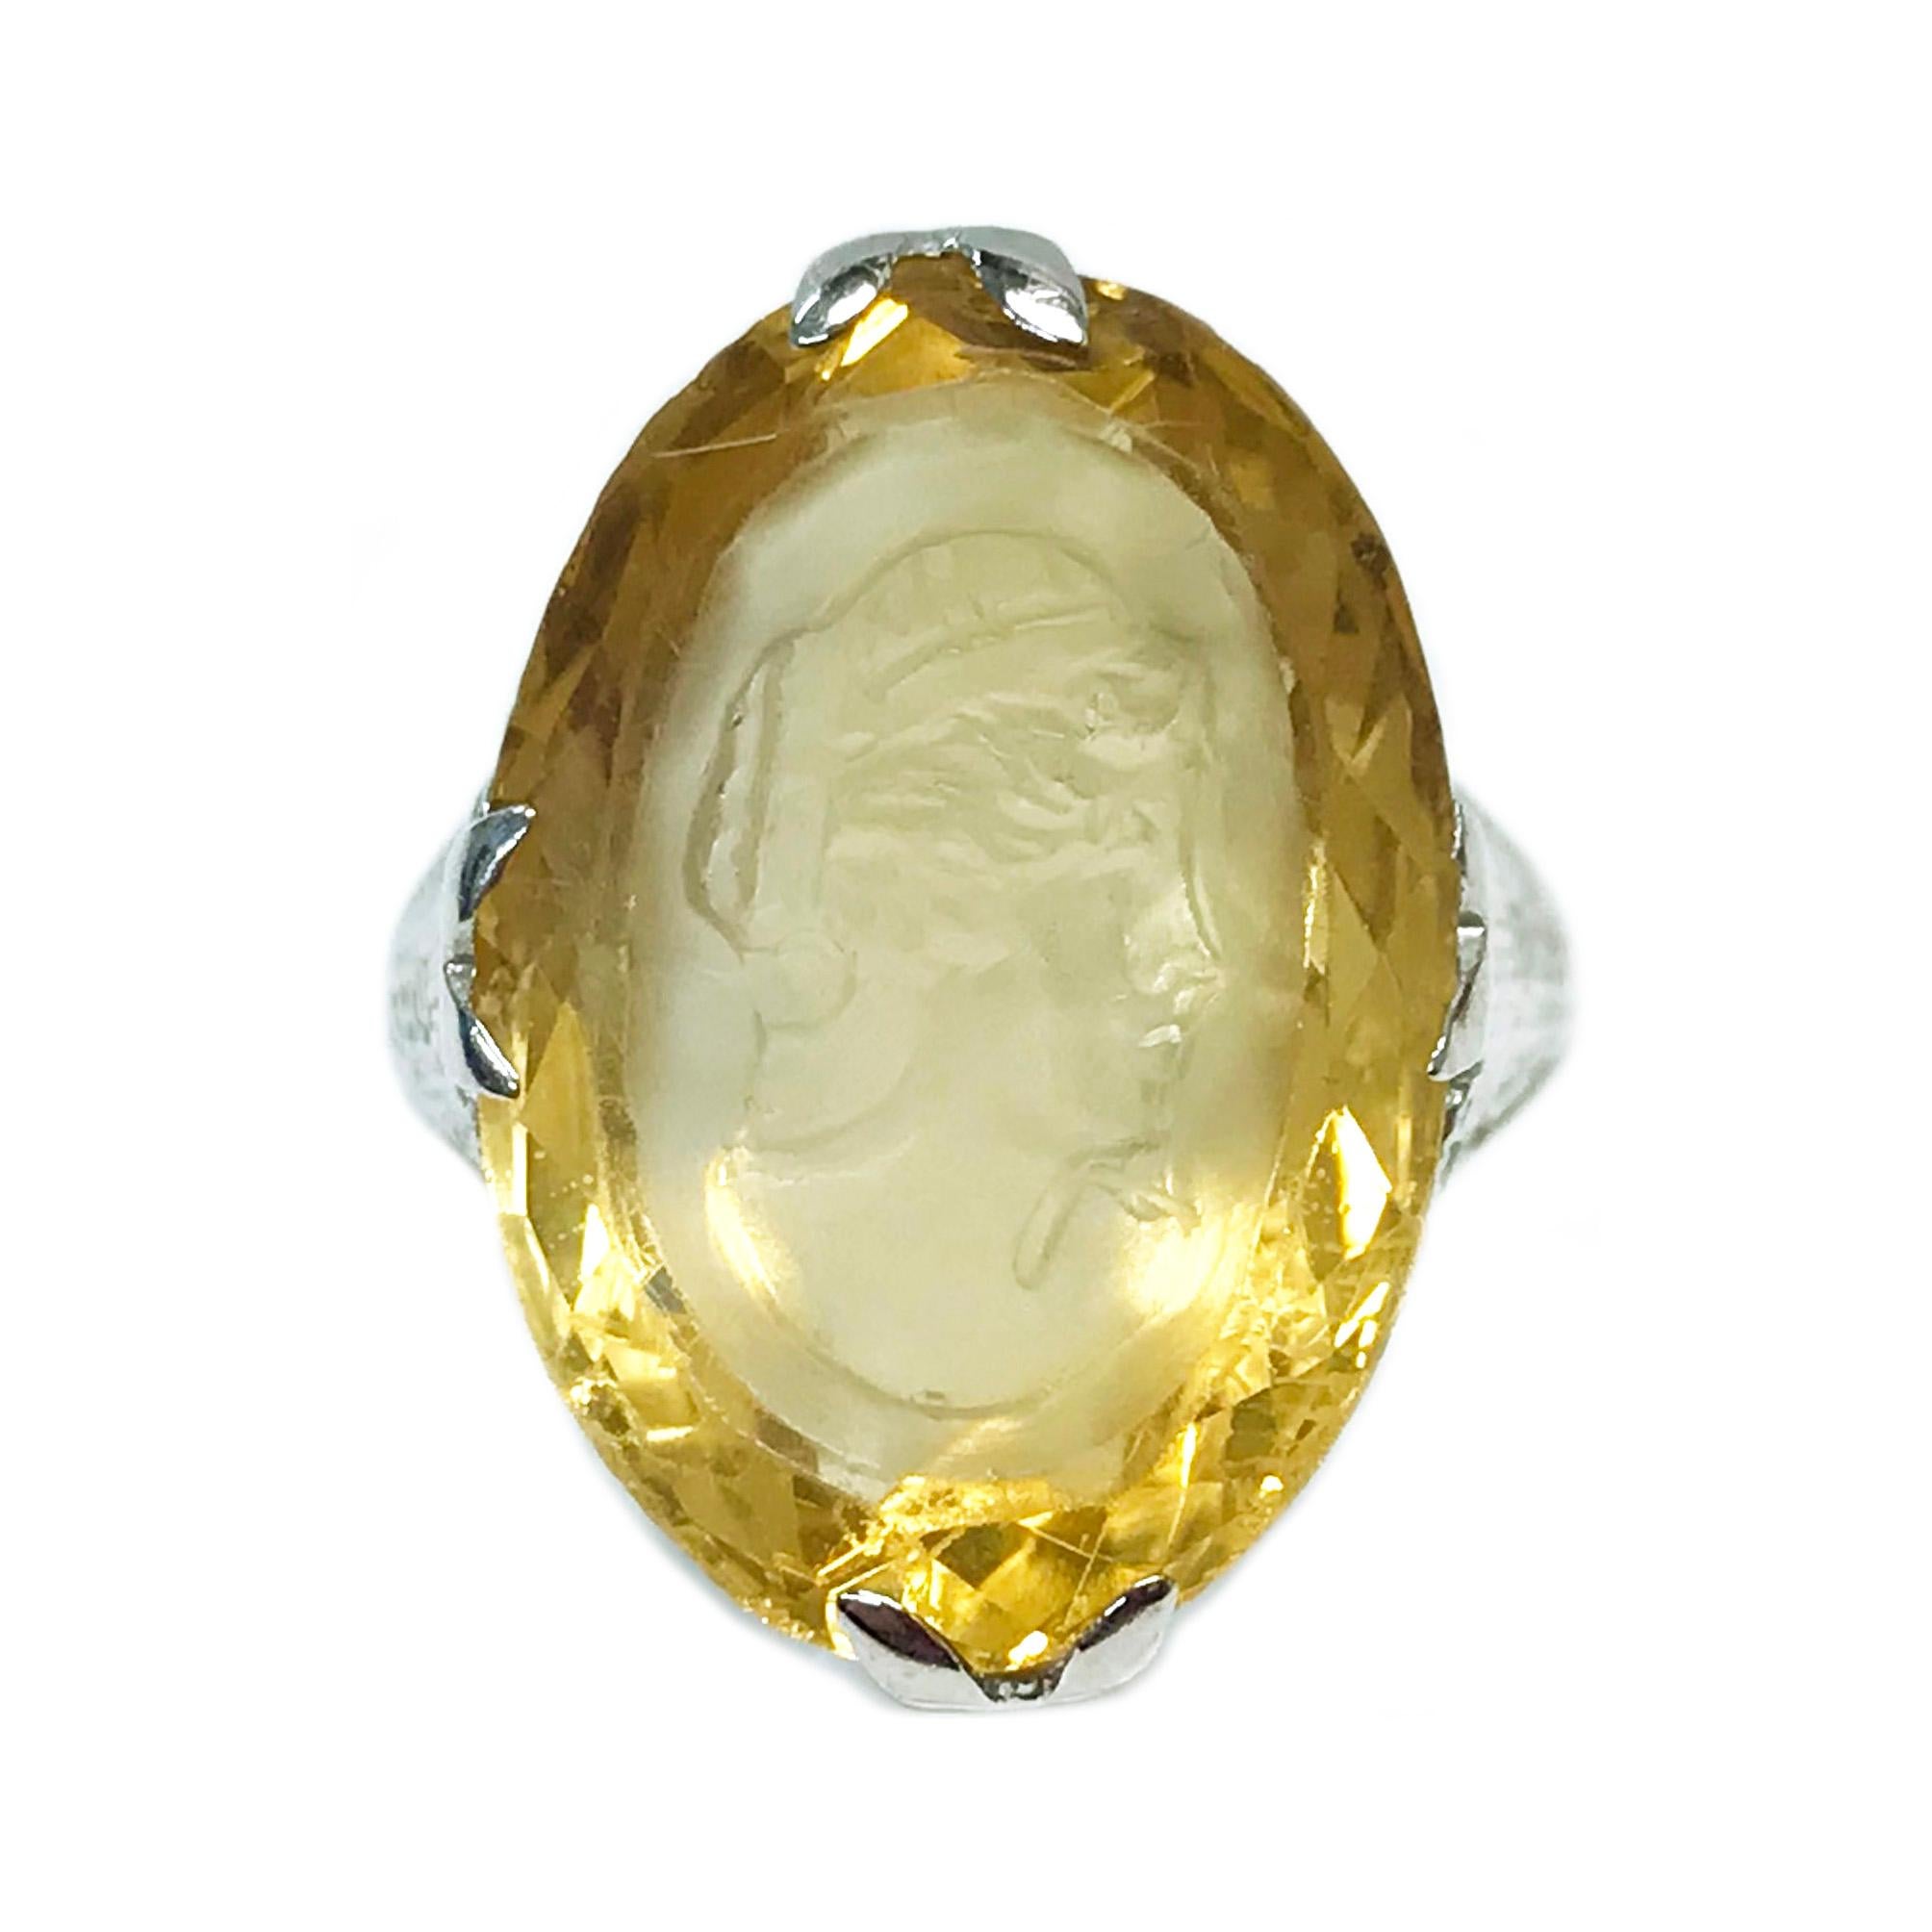 18 Karat White Gold Citrine Intaglio/Relief Ring. The ring features an oval 17mm x 12mm light Citrine stone with the image of a Roman female head in relief. The thin-band has an Art Deco filigree motif toward the top and a smooth shiny finish band.